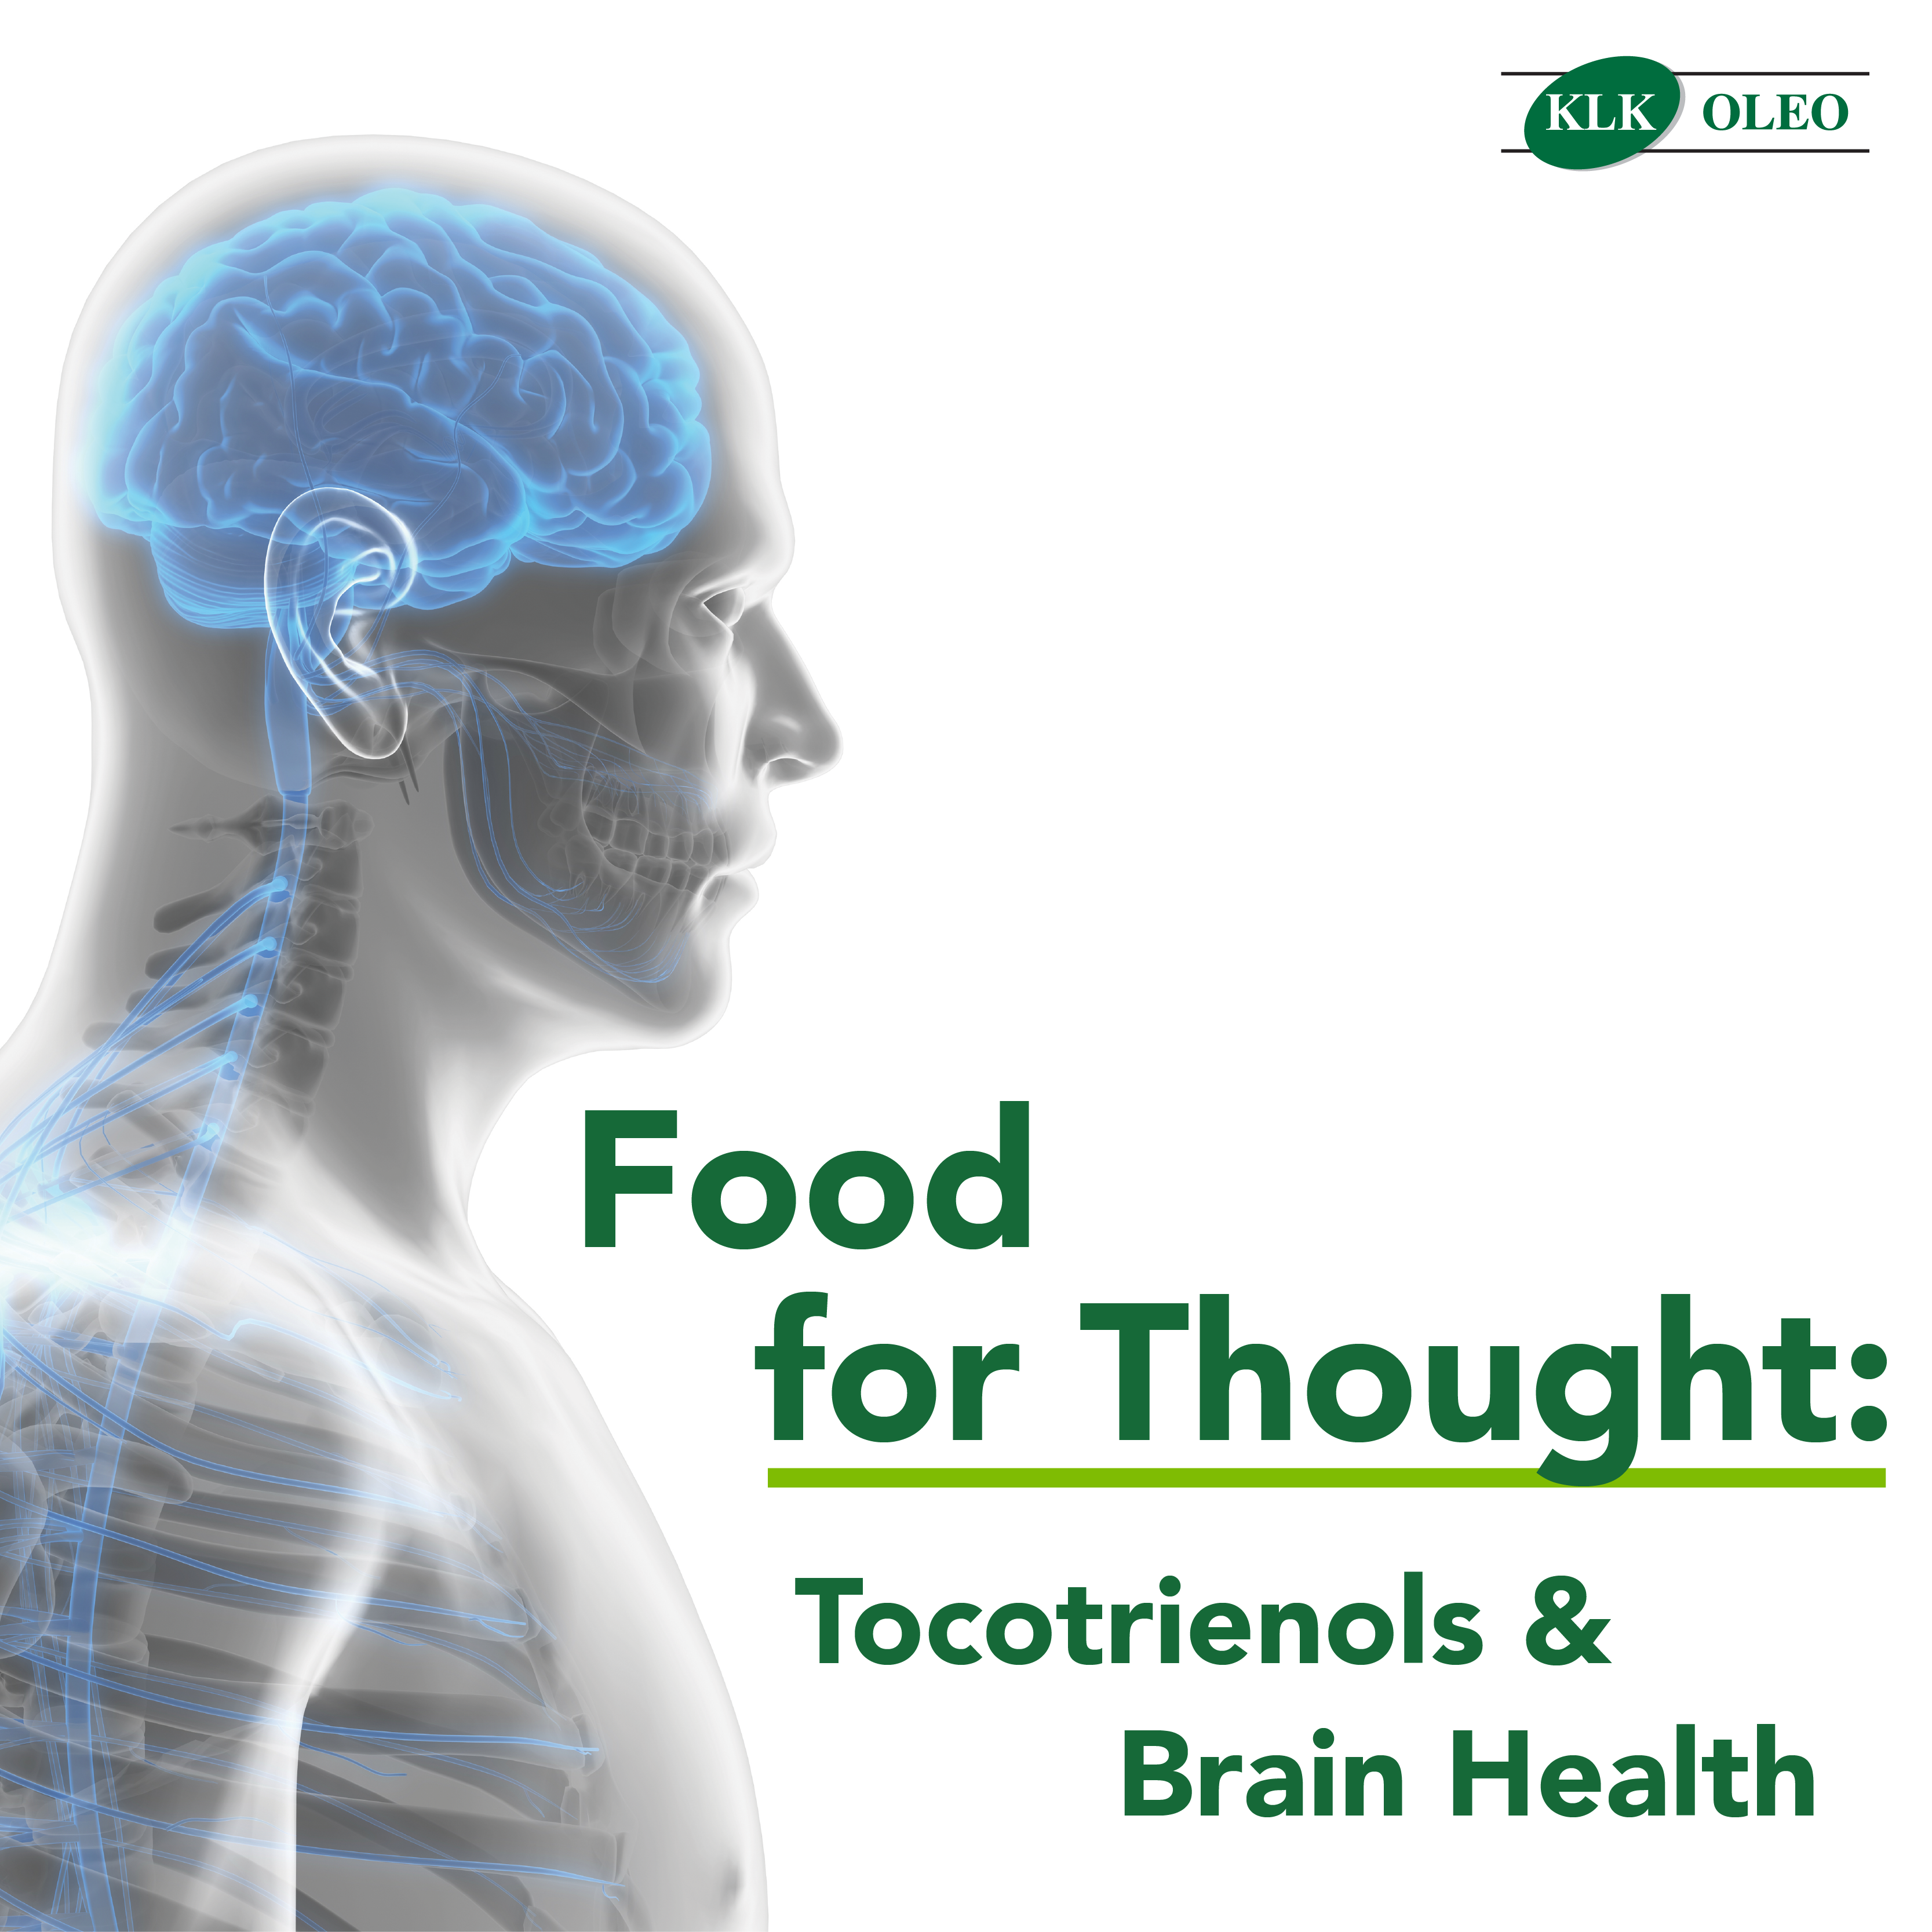 Food for Thought: Tocotrienols & Brain Health